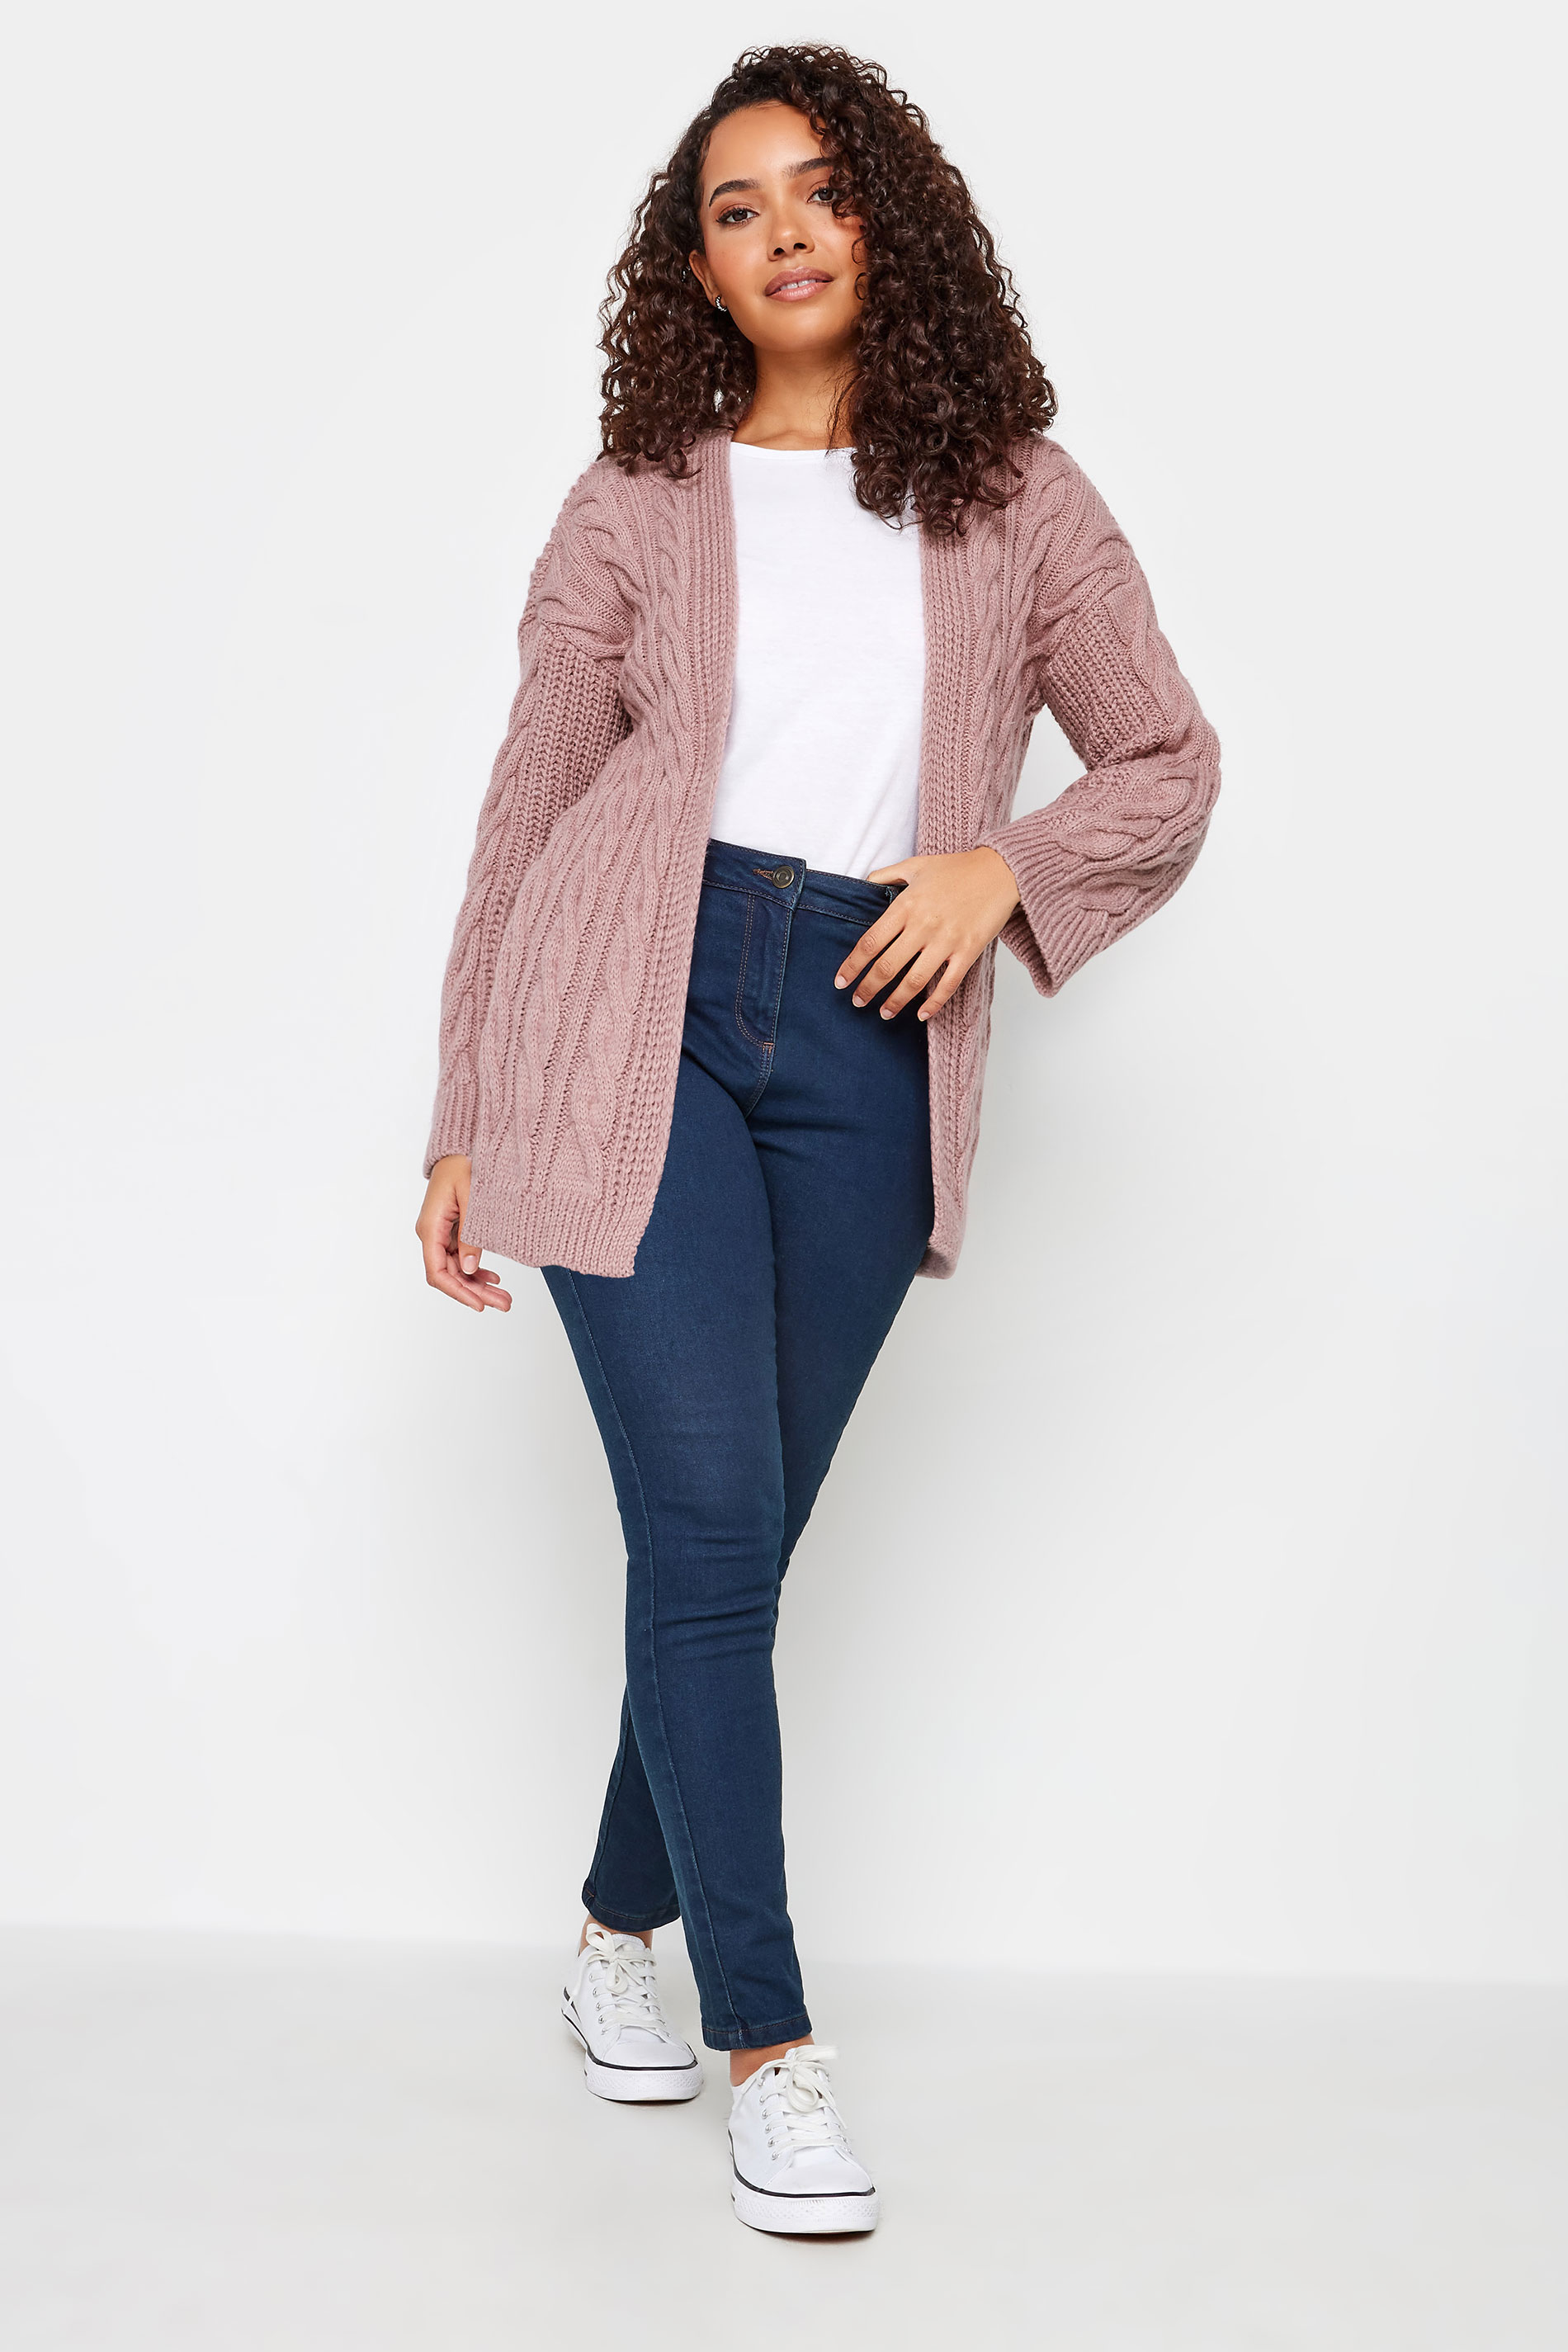 M&Co Petite Pink Chunky Cable Knit Cardigan | M&Co 2